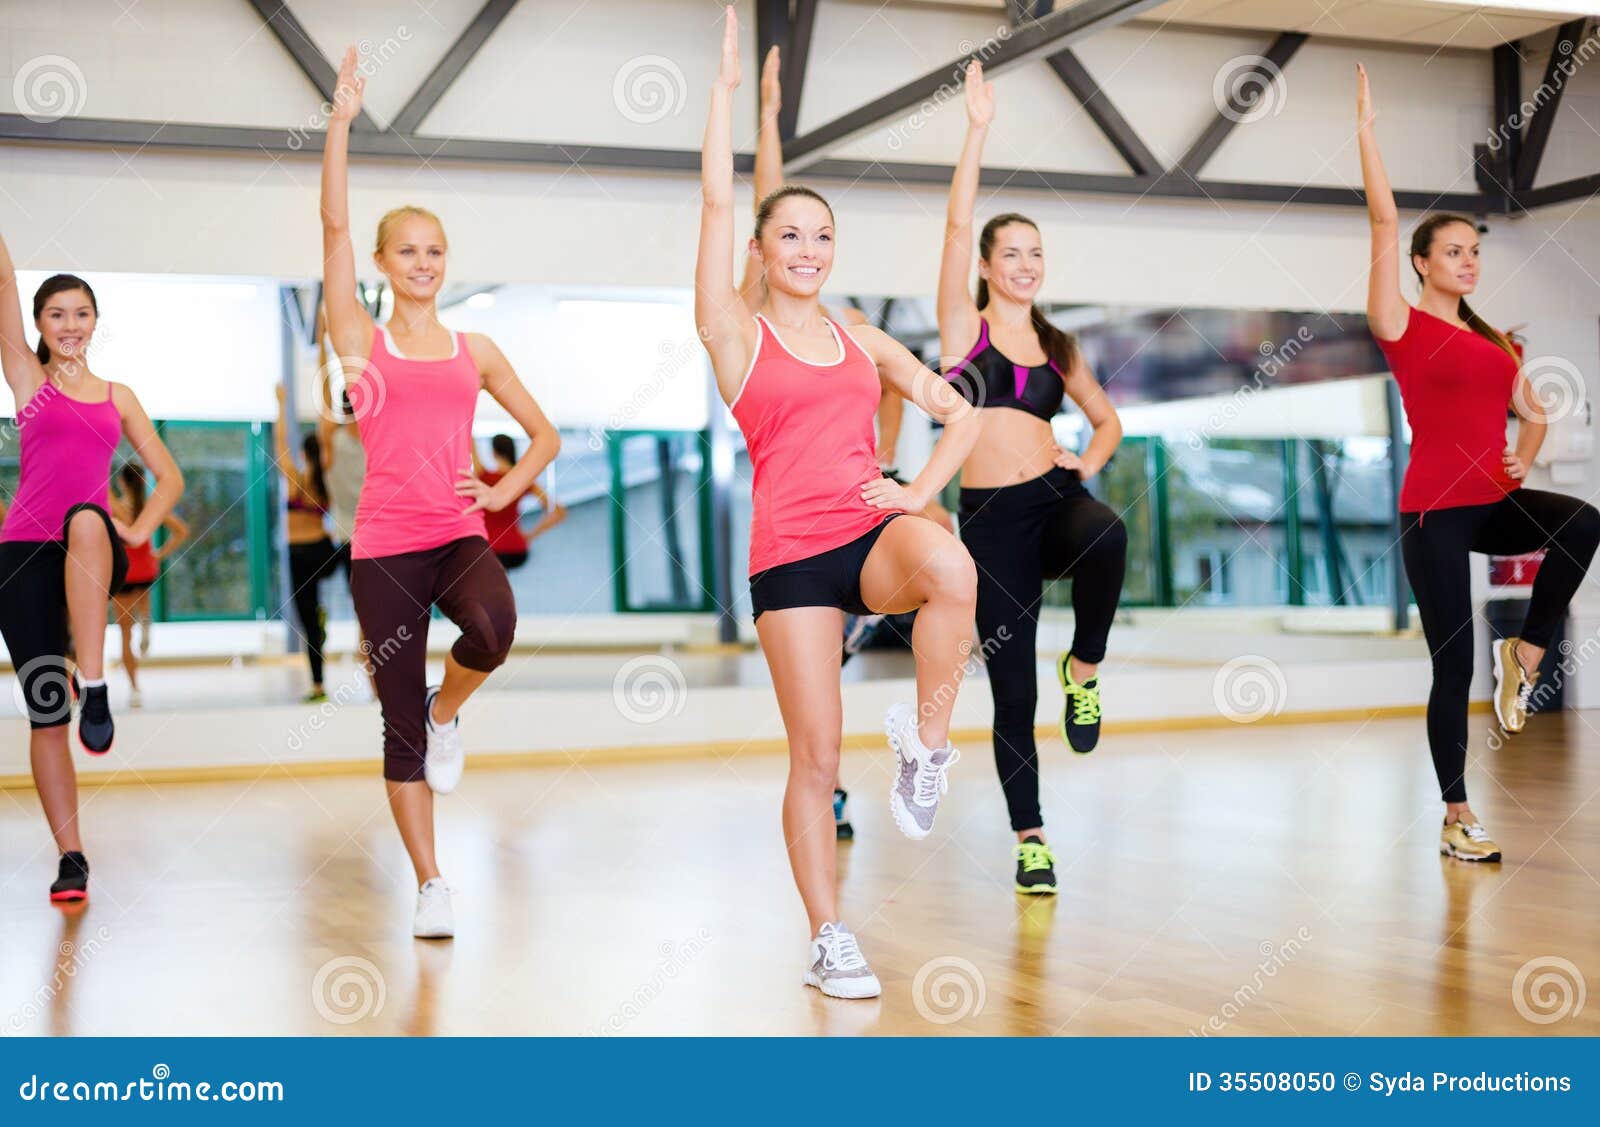 Cardio Step Dance Group At Fitness Gym Training Stock 